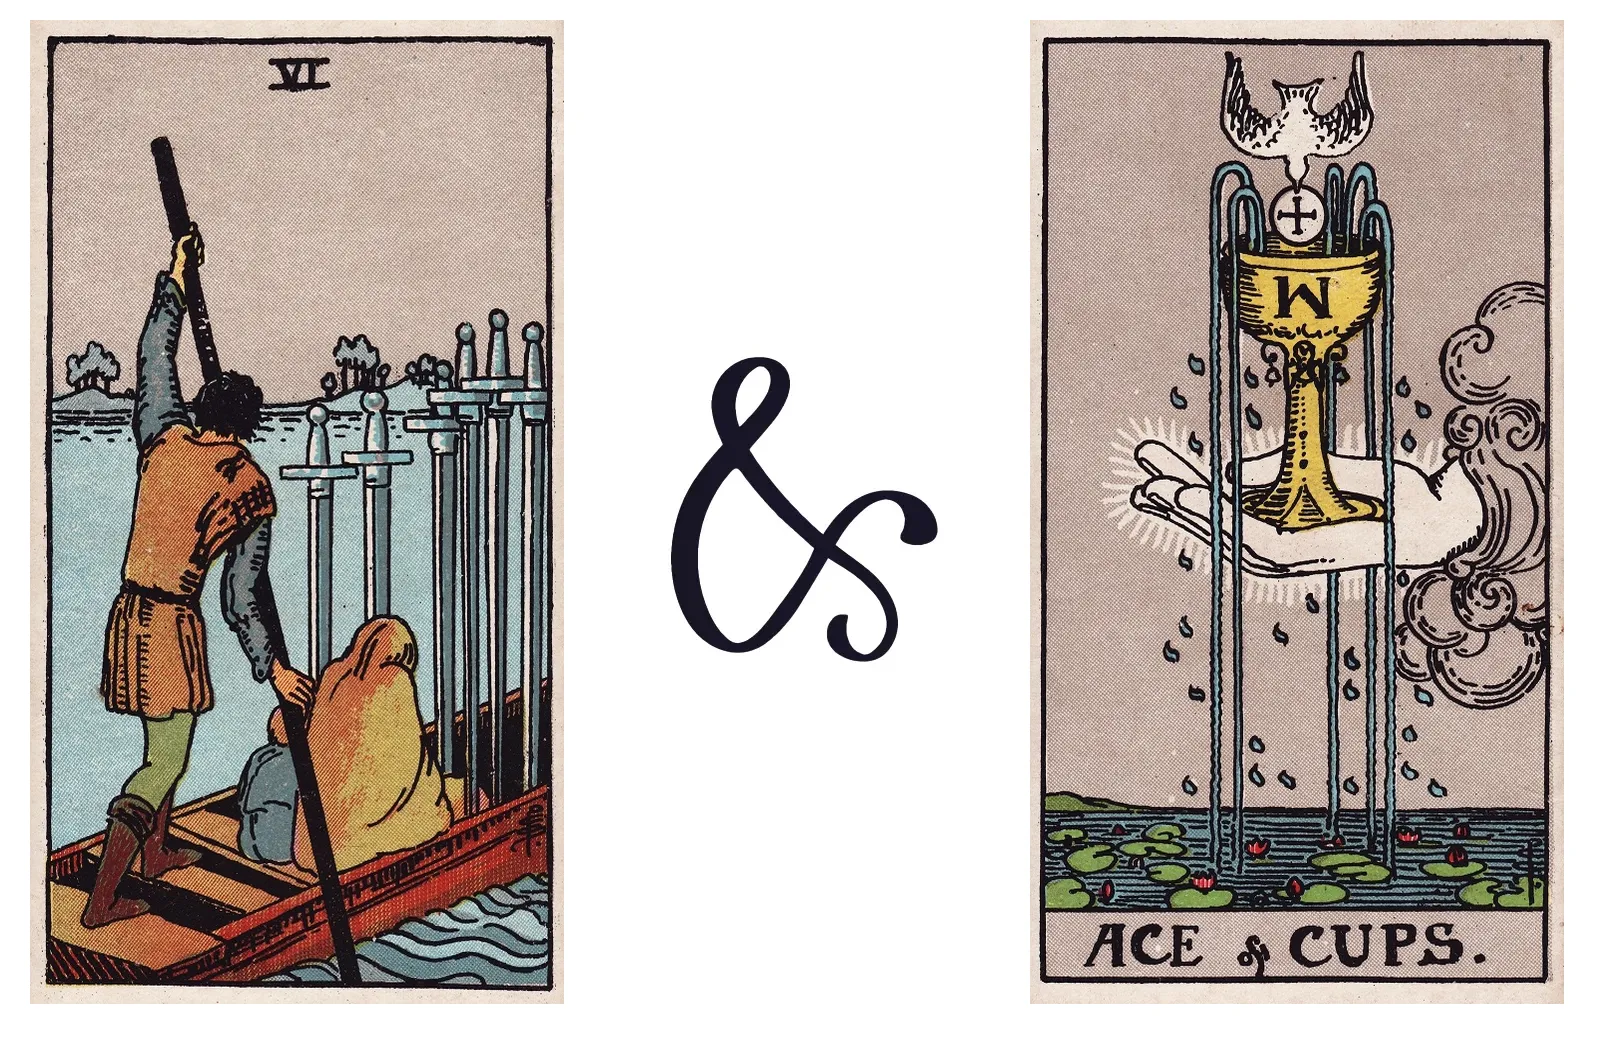 Six of Swords and Ace of Cups